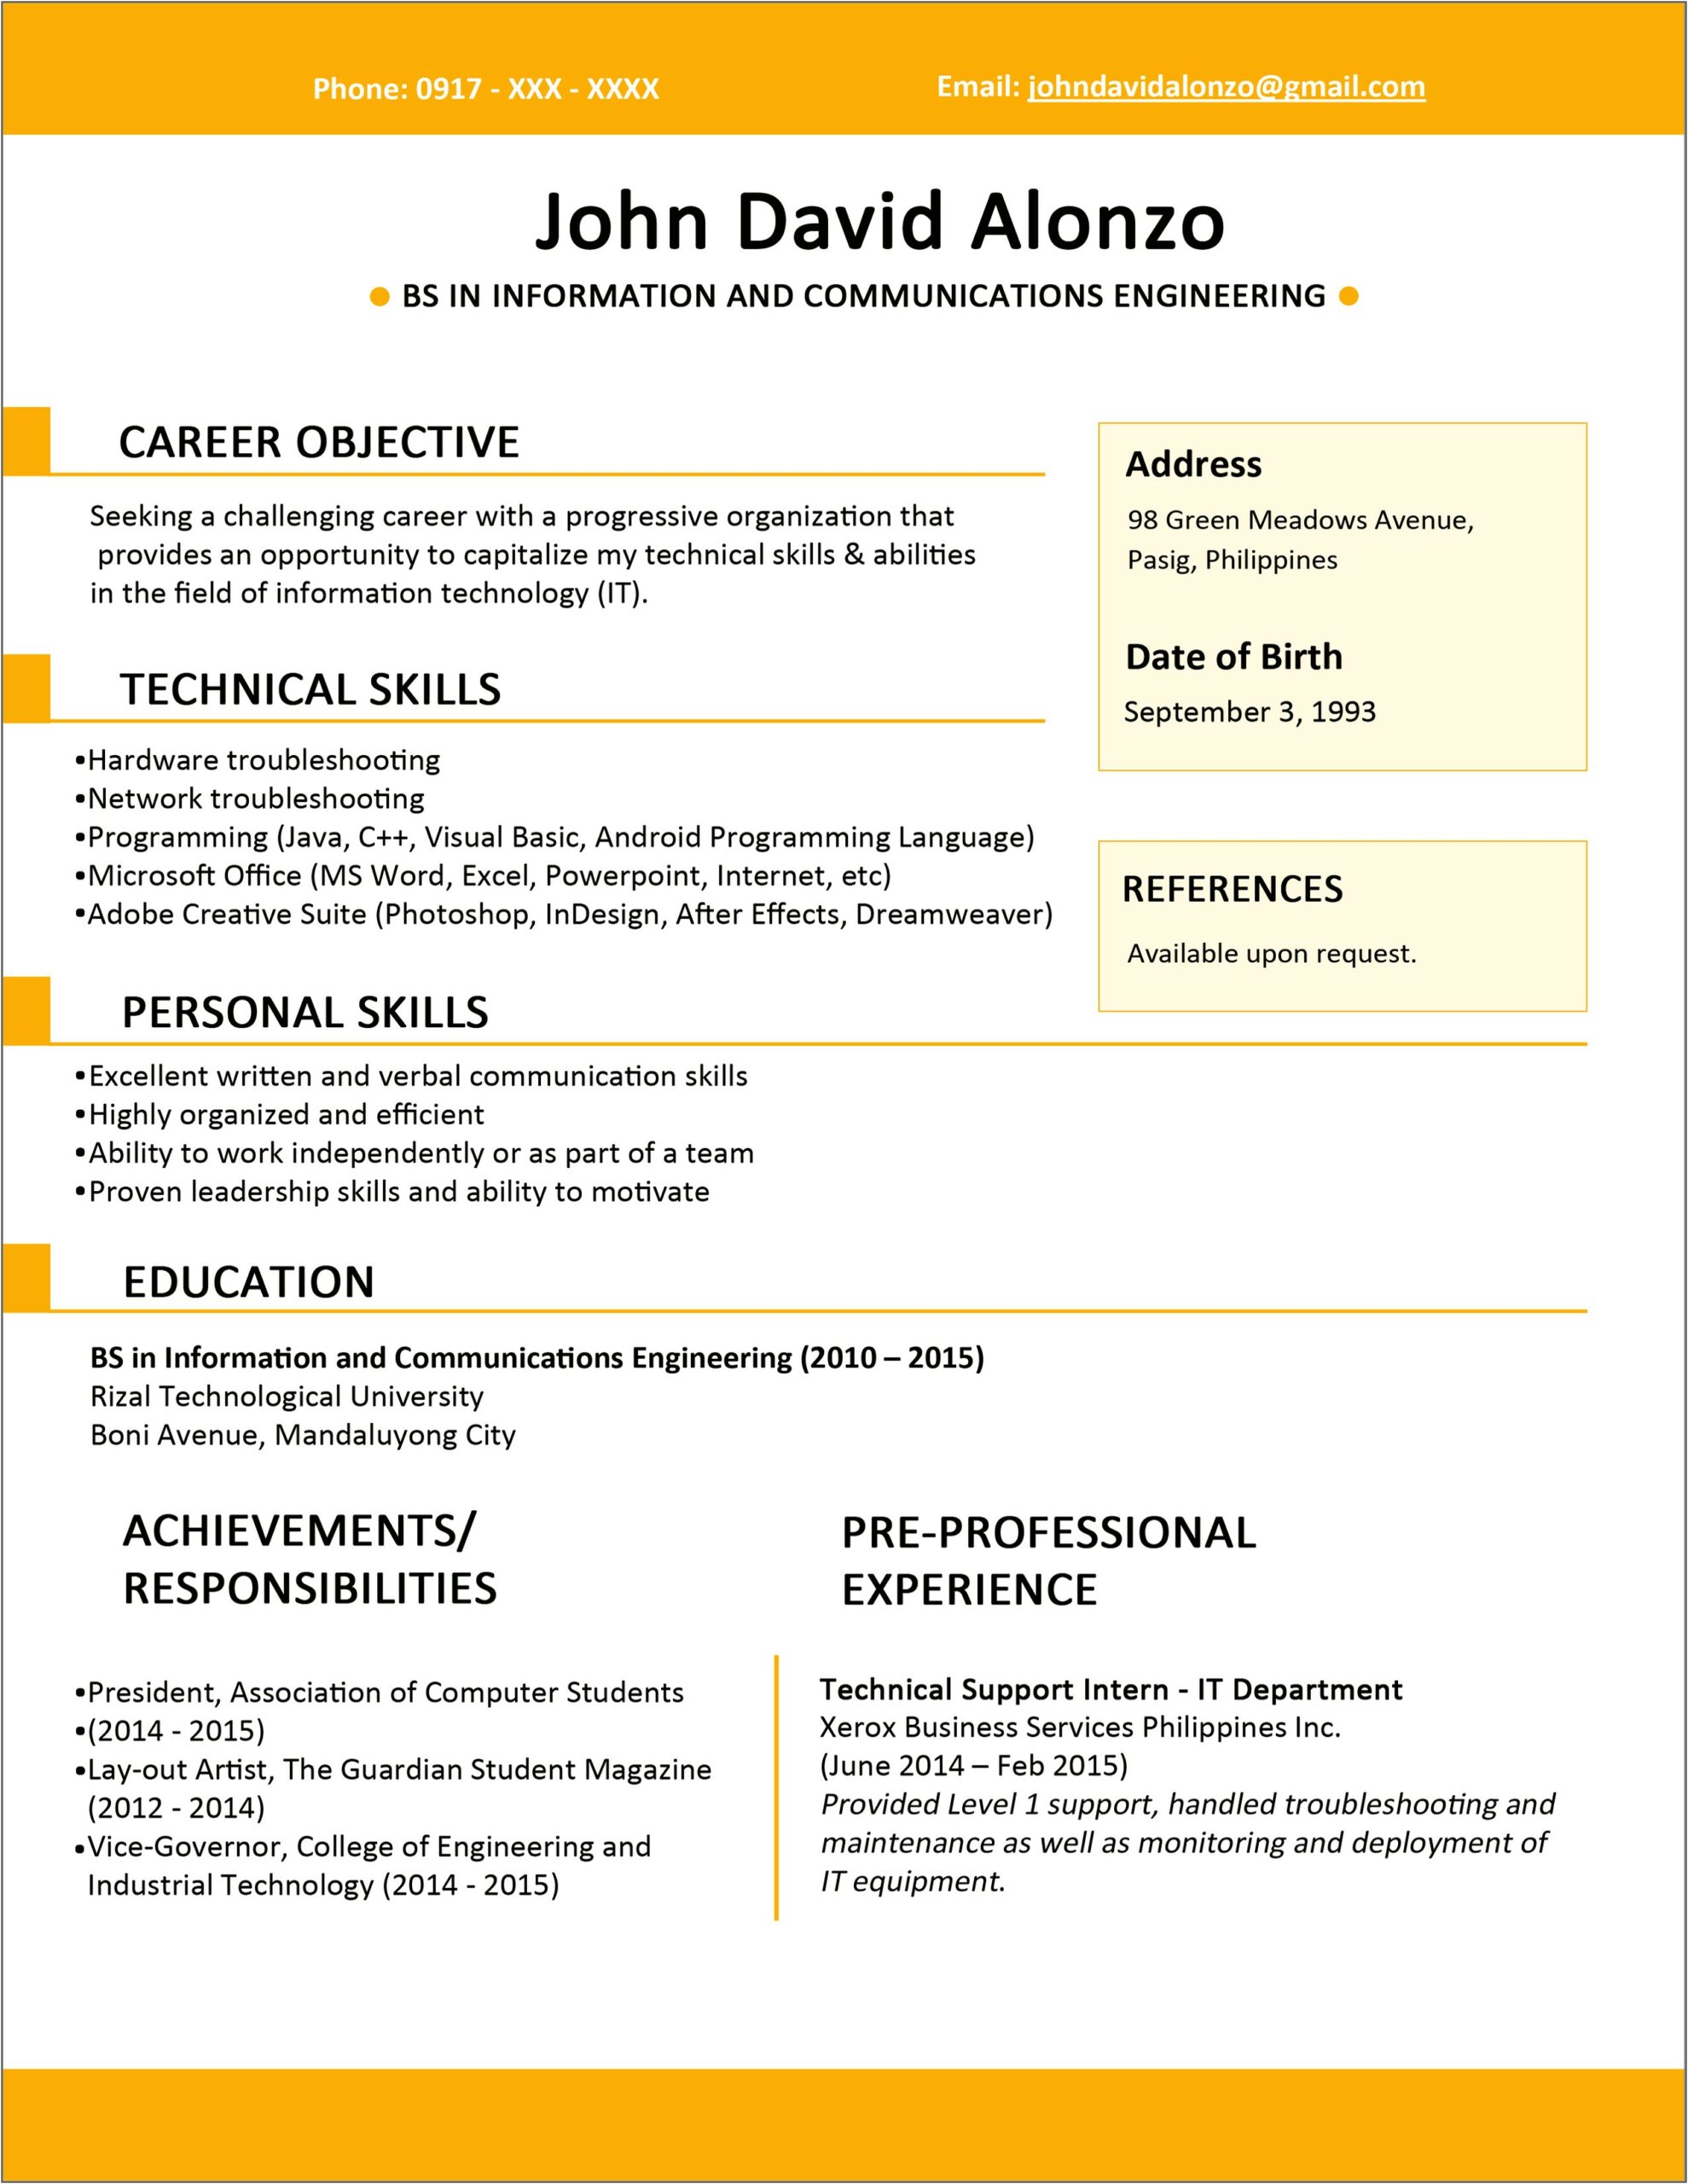 Examples Of Description Of Resume